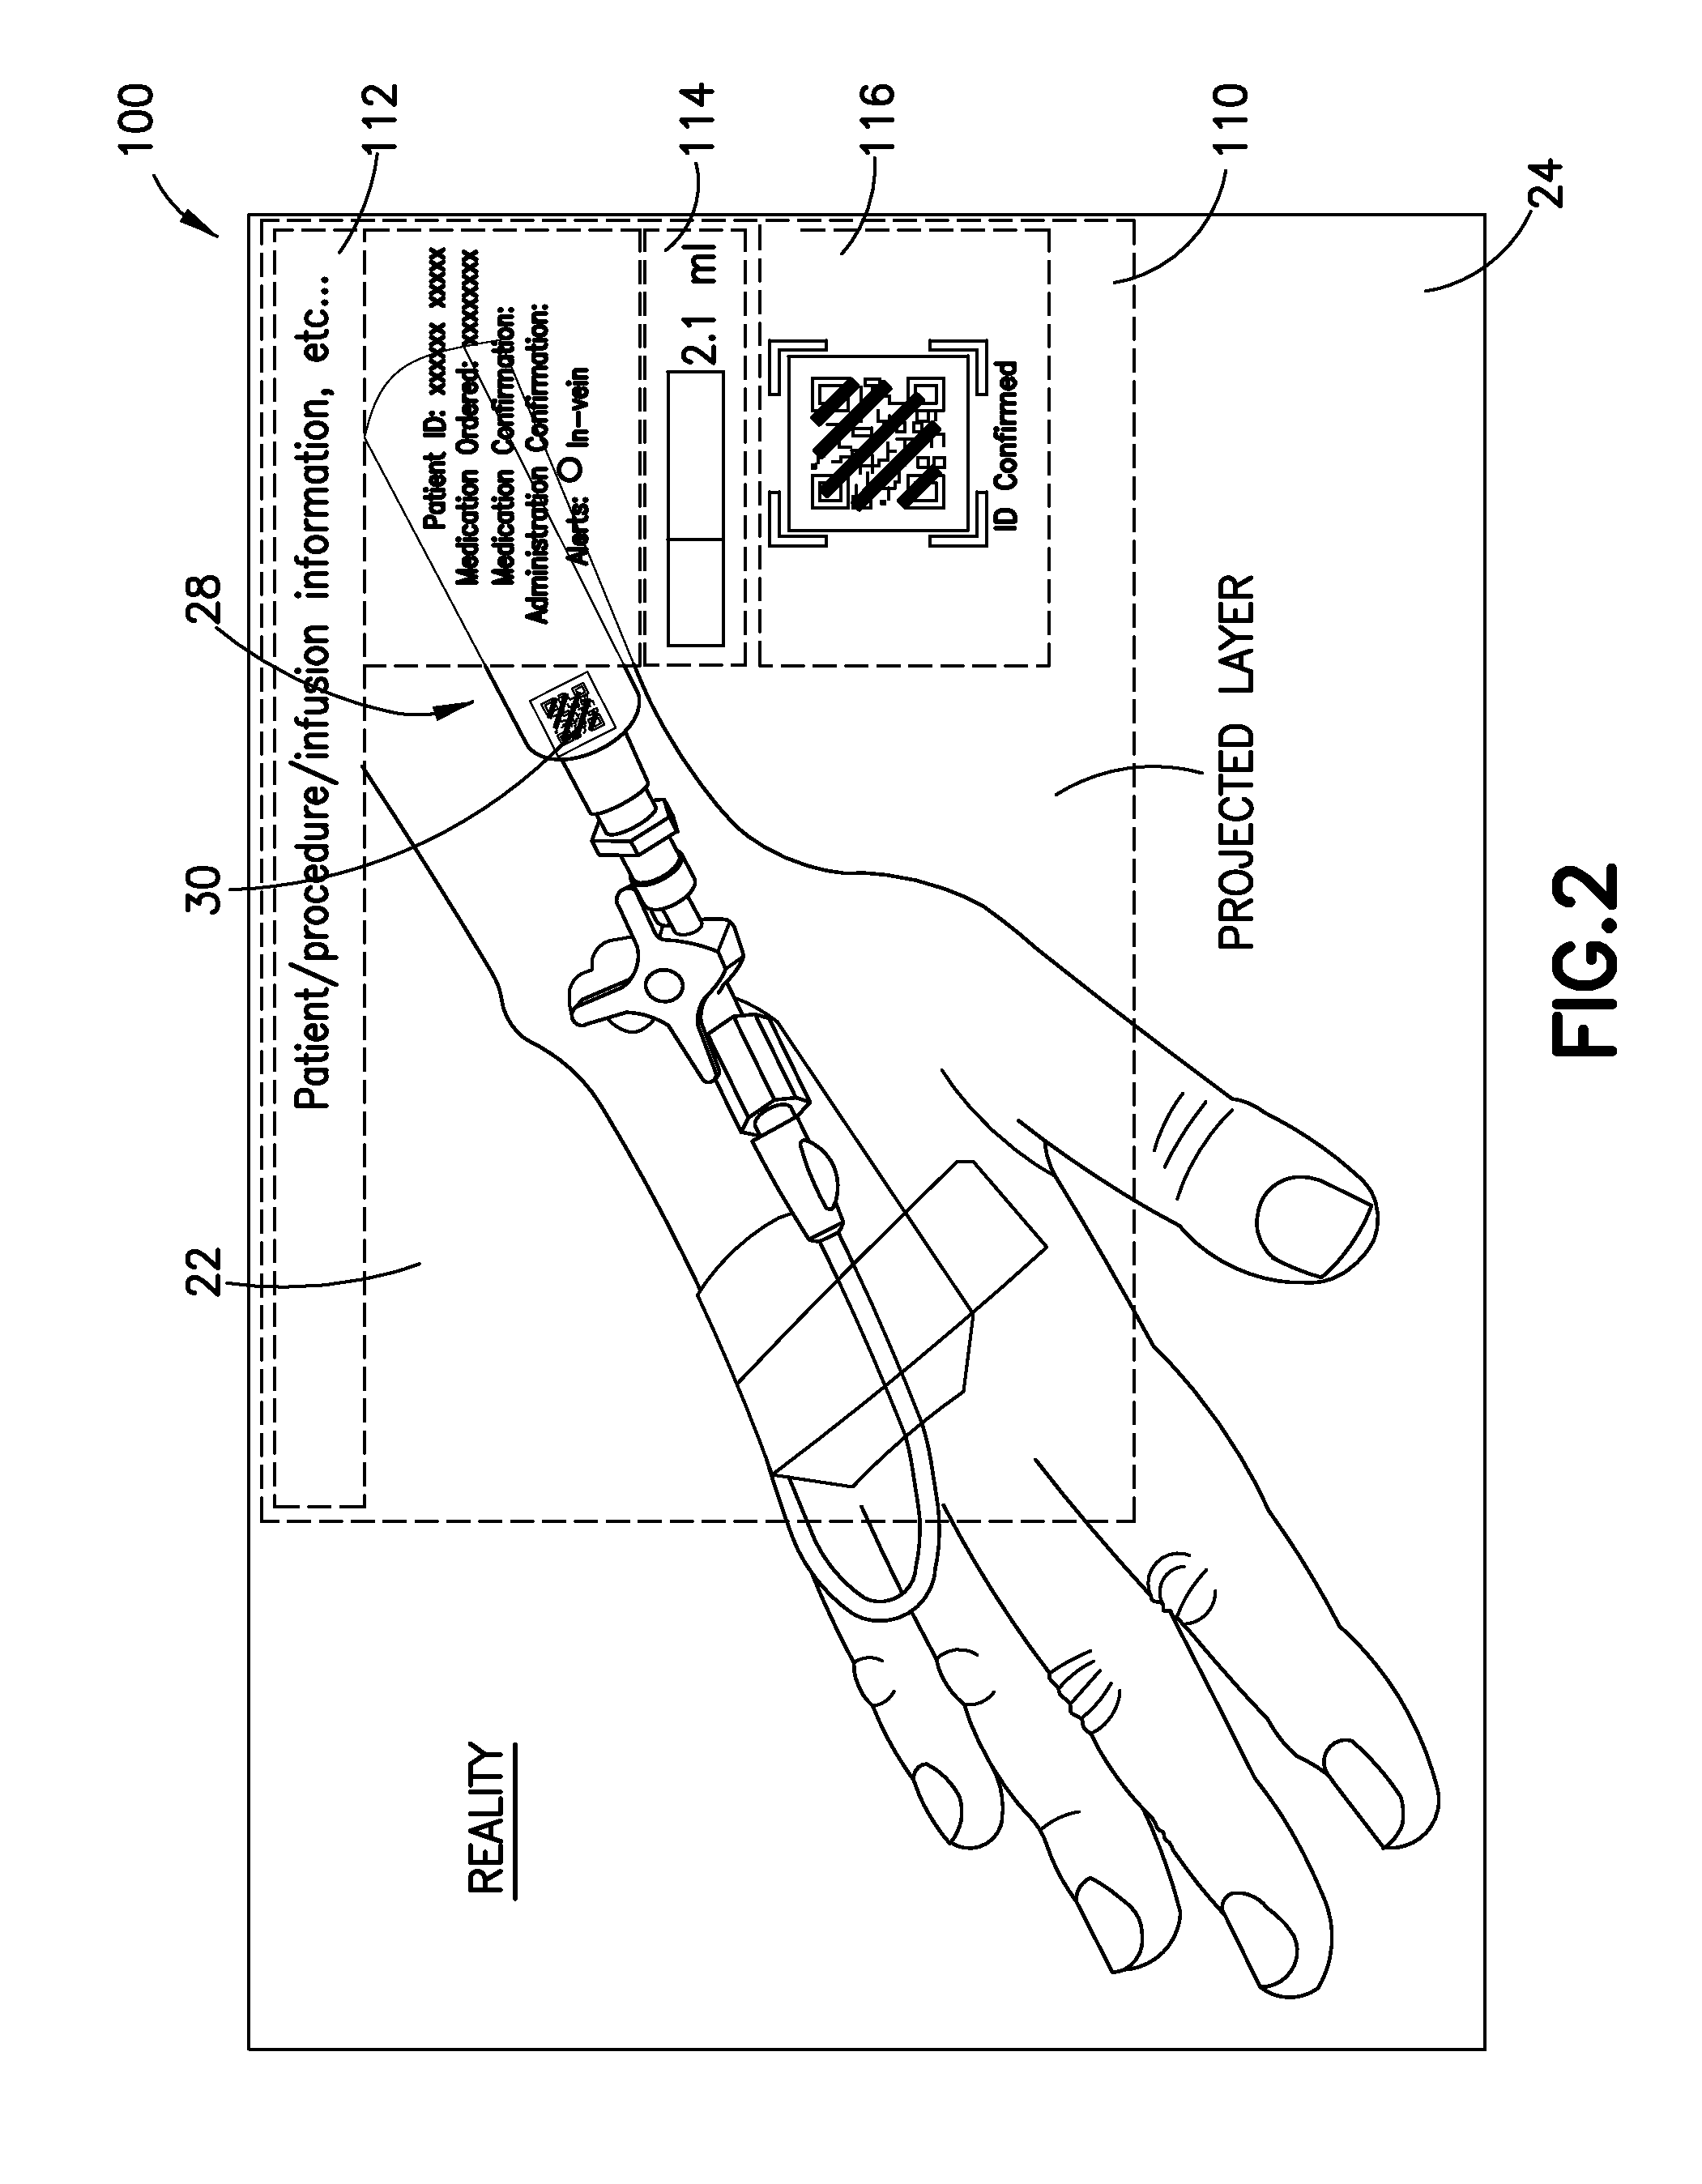 Wearable Electronic Device for Enhancing Visualization During Insertion of an Invasive Device